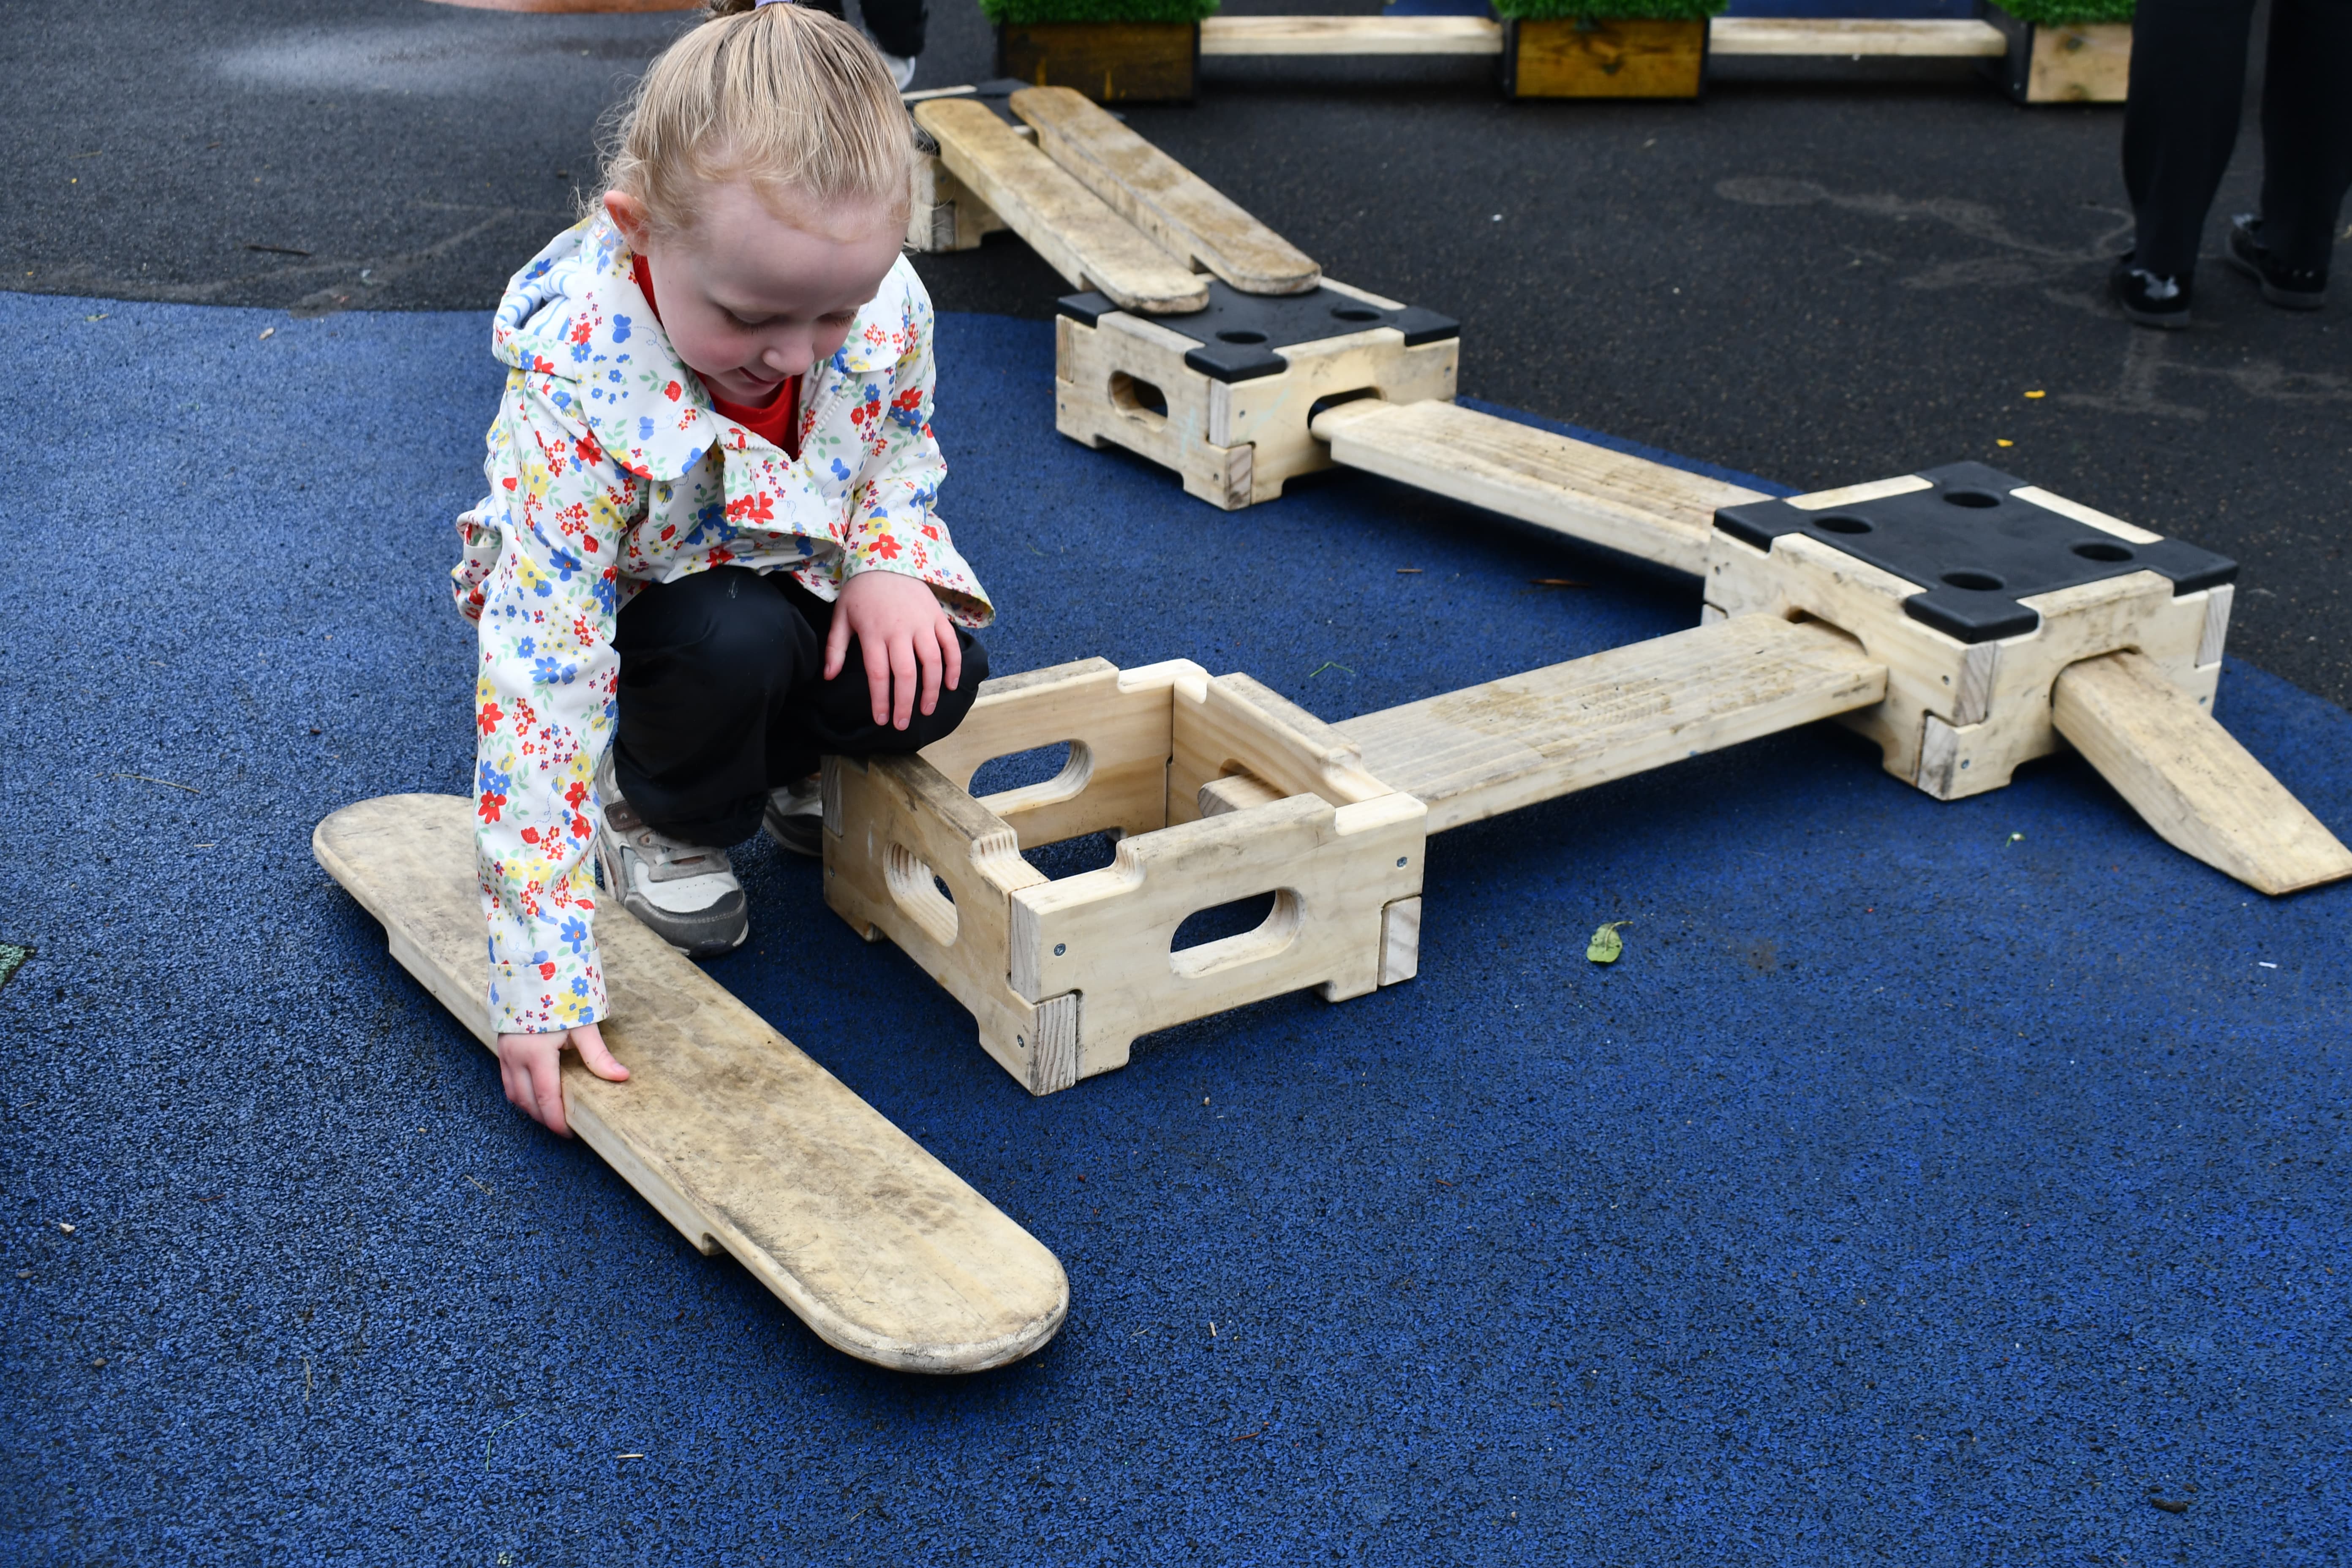 A little girl is playing with wooden planks and boxes from the Play Builder set. She is kneeling down and placing one hand on a plank and the other on her knee. The Play Builder set is laid out on a wetpour surface.